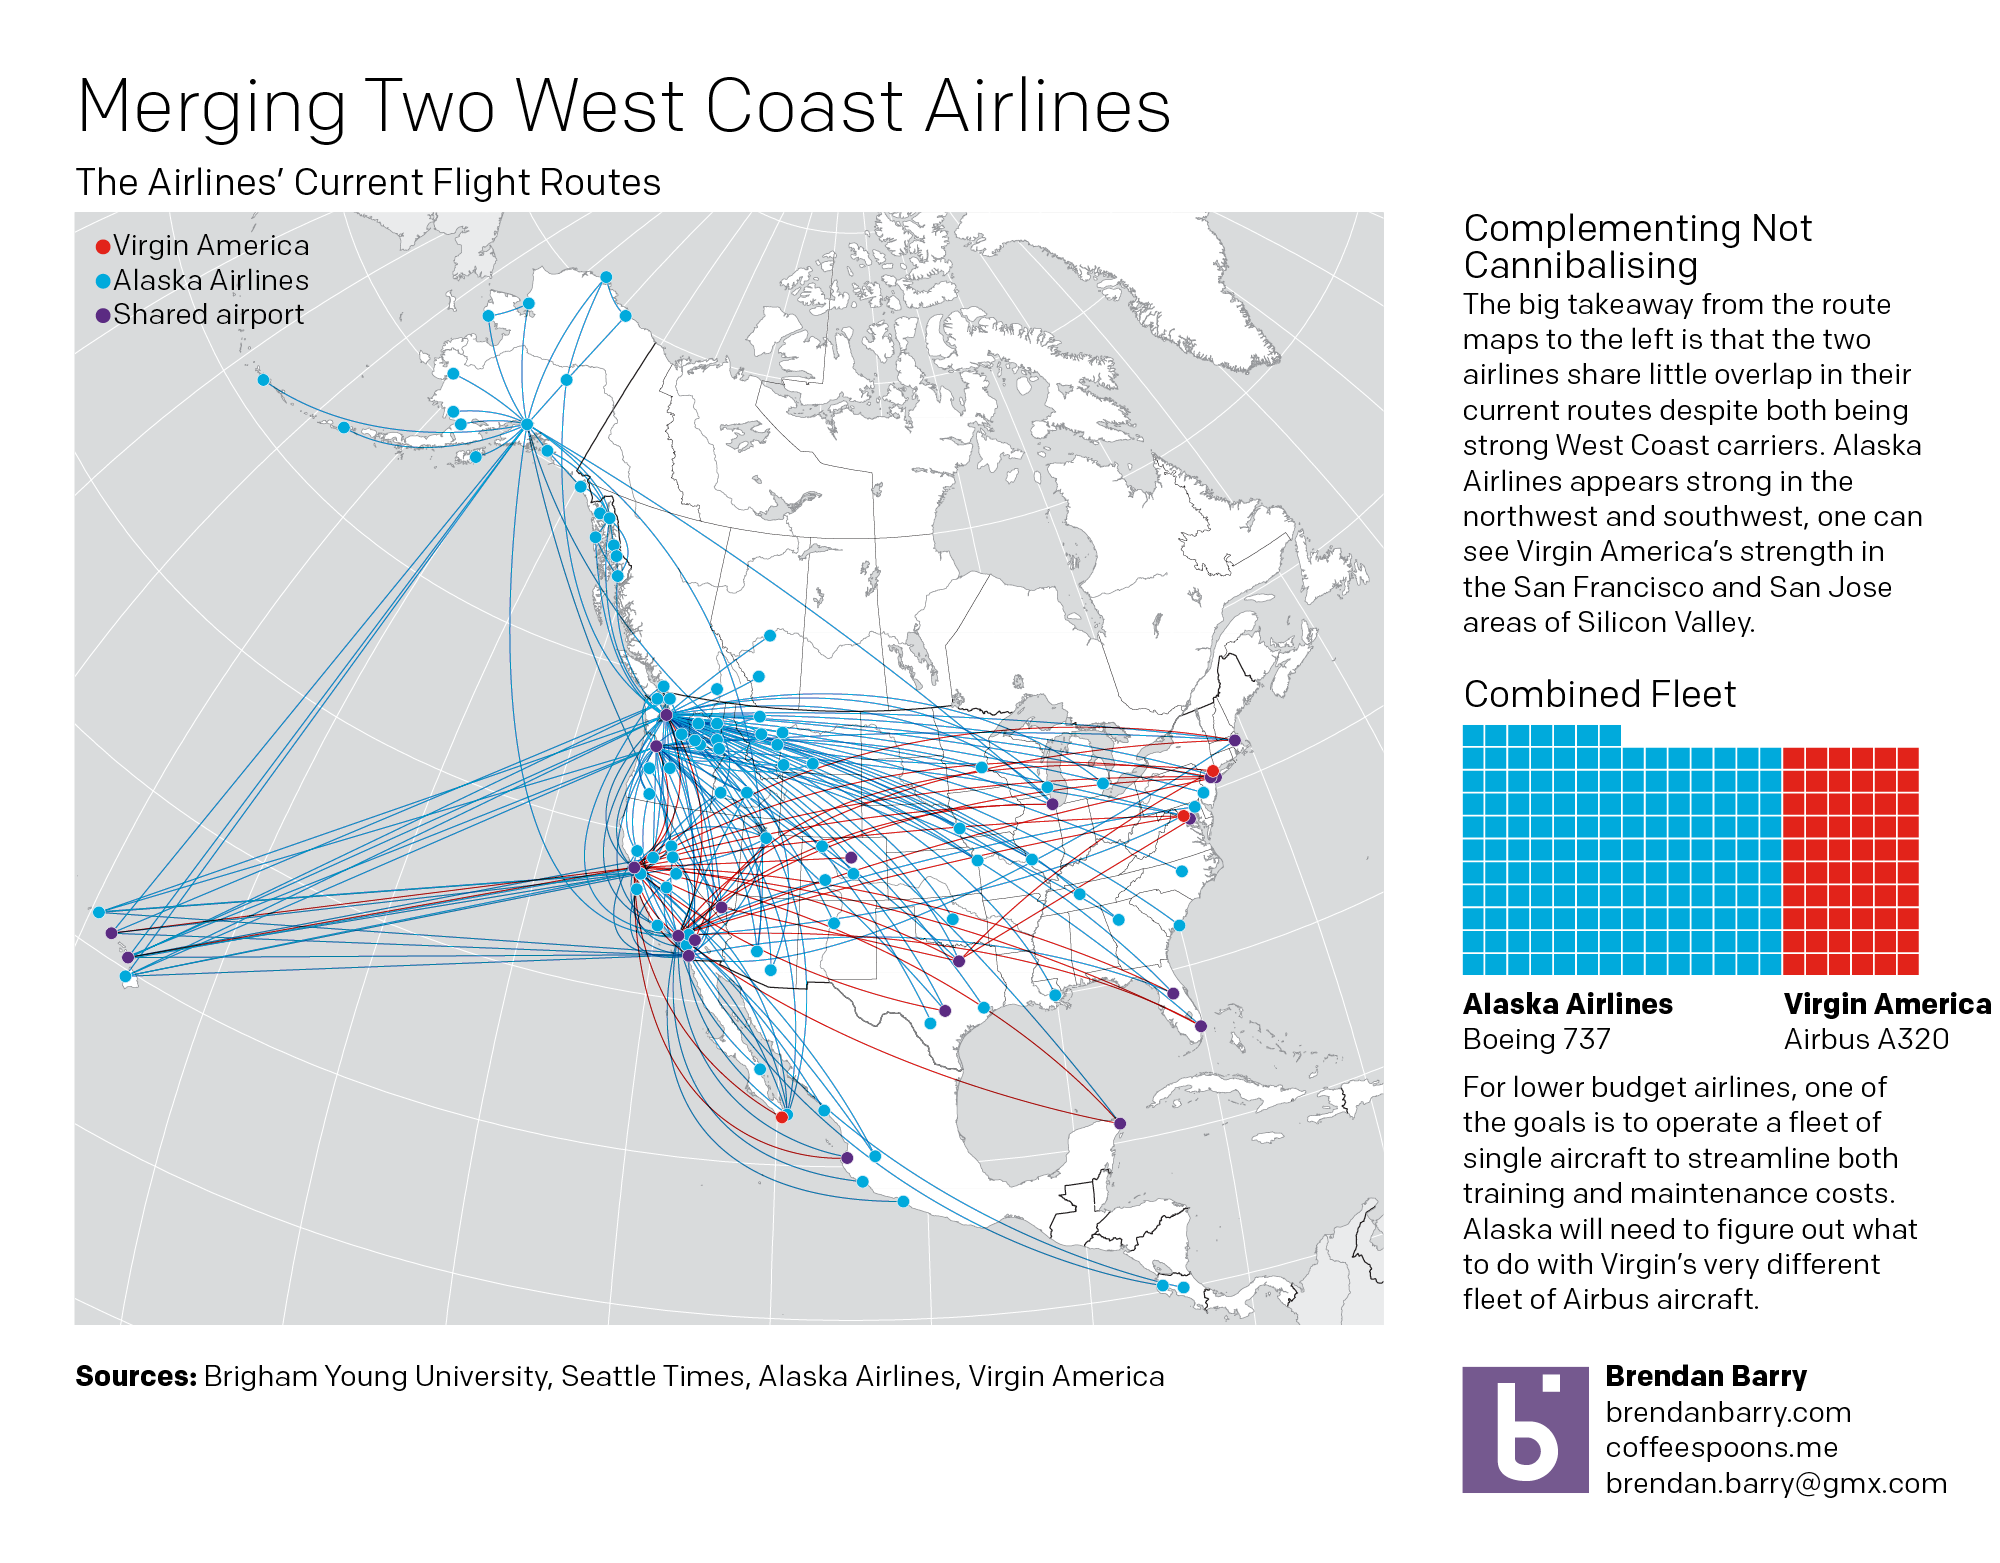 A brief look at the merger of Alaska Airlines and Virgin America